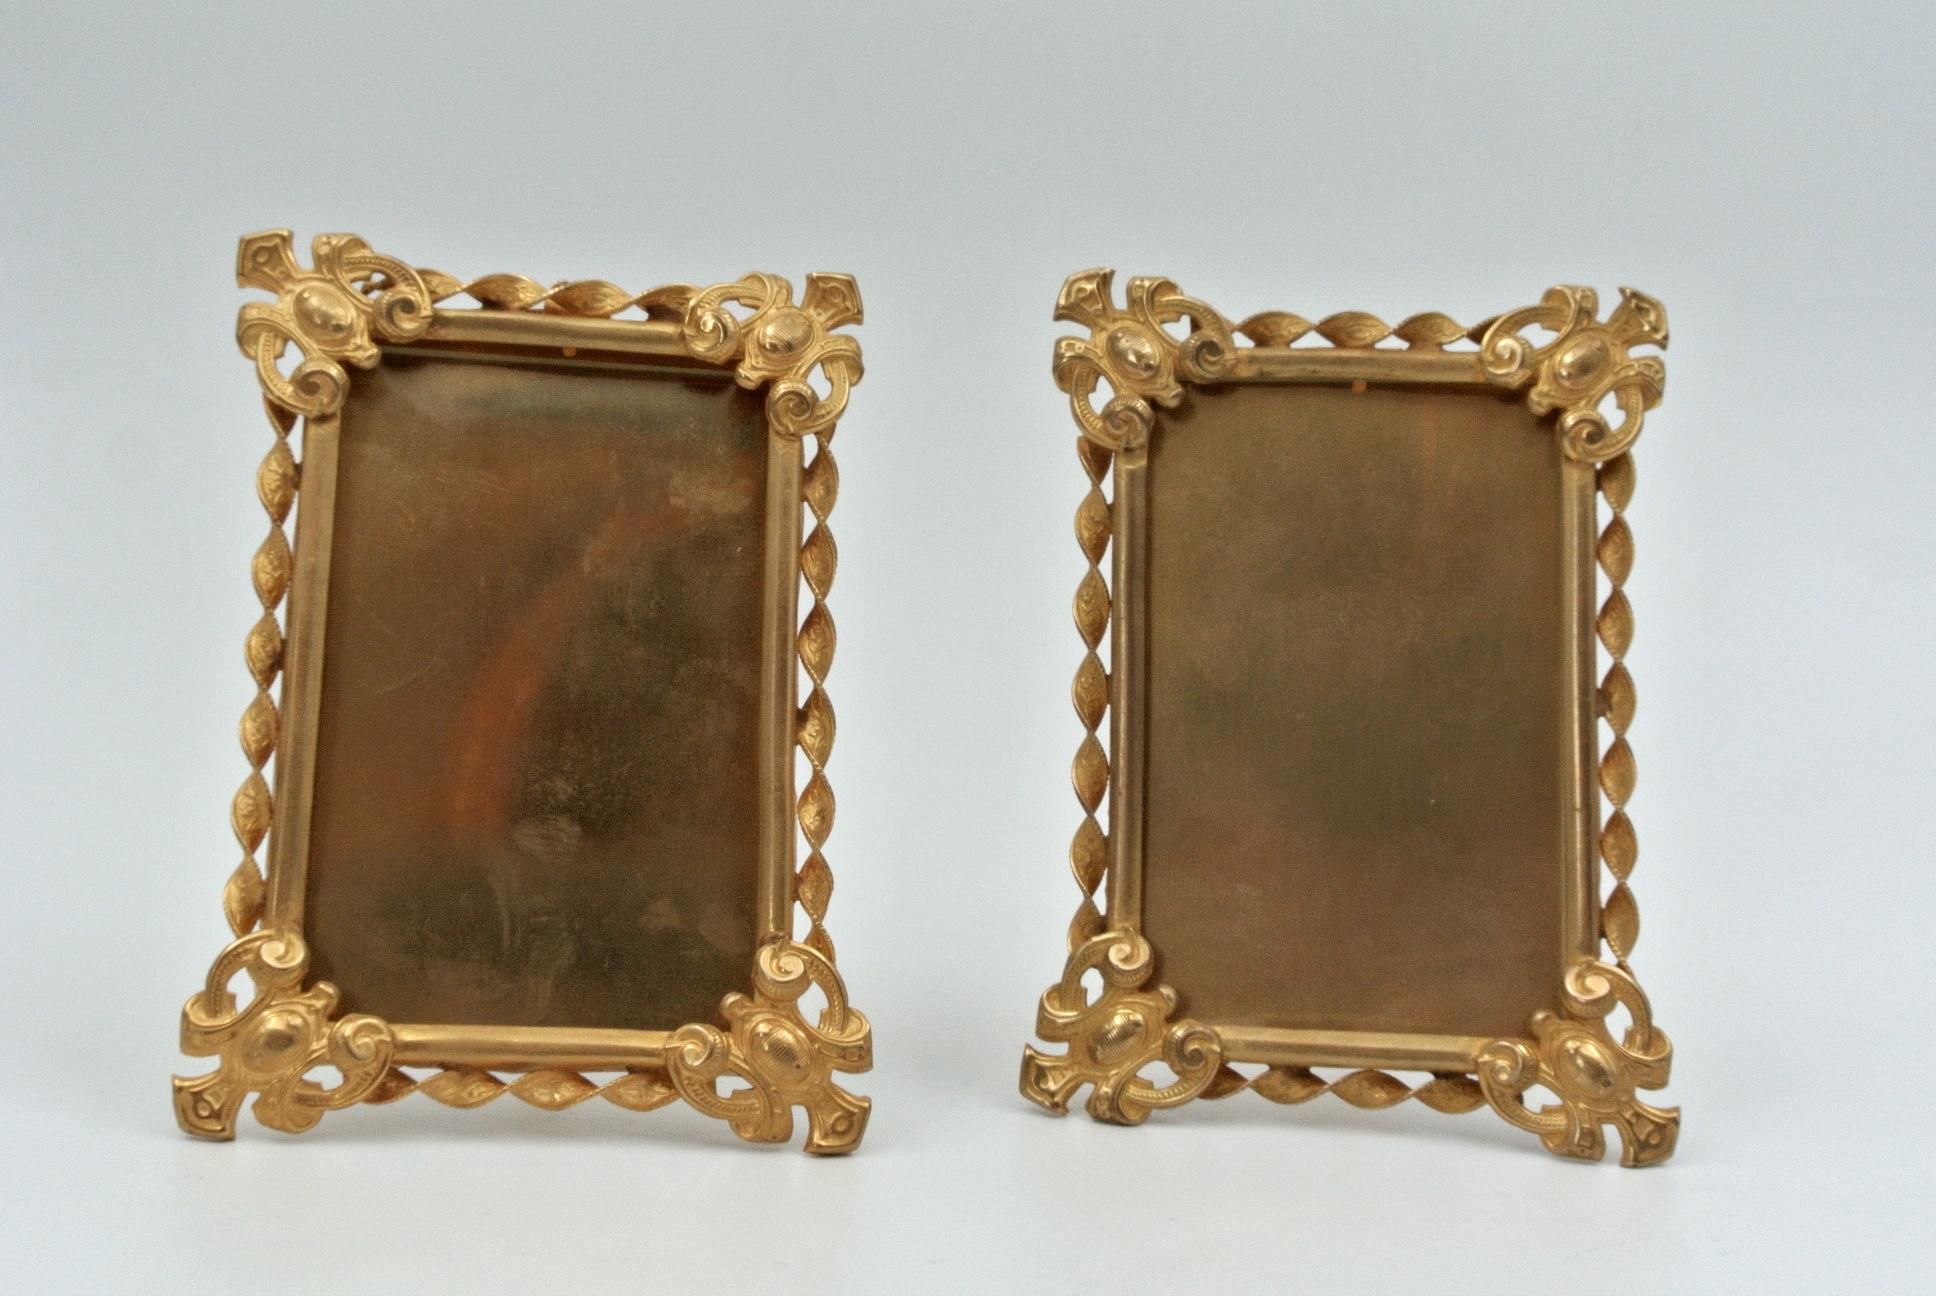 Pair of small gilded brass photo frames, 19th century, Napoleon III period.
Measures: H 12 cm, W 9 cm, D 2 cm.